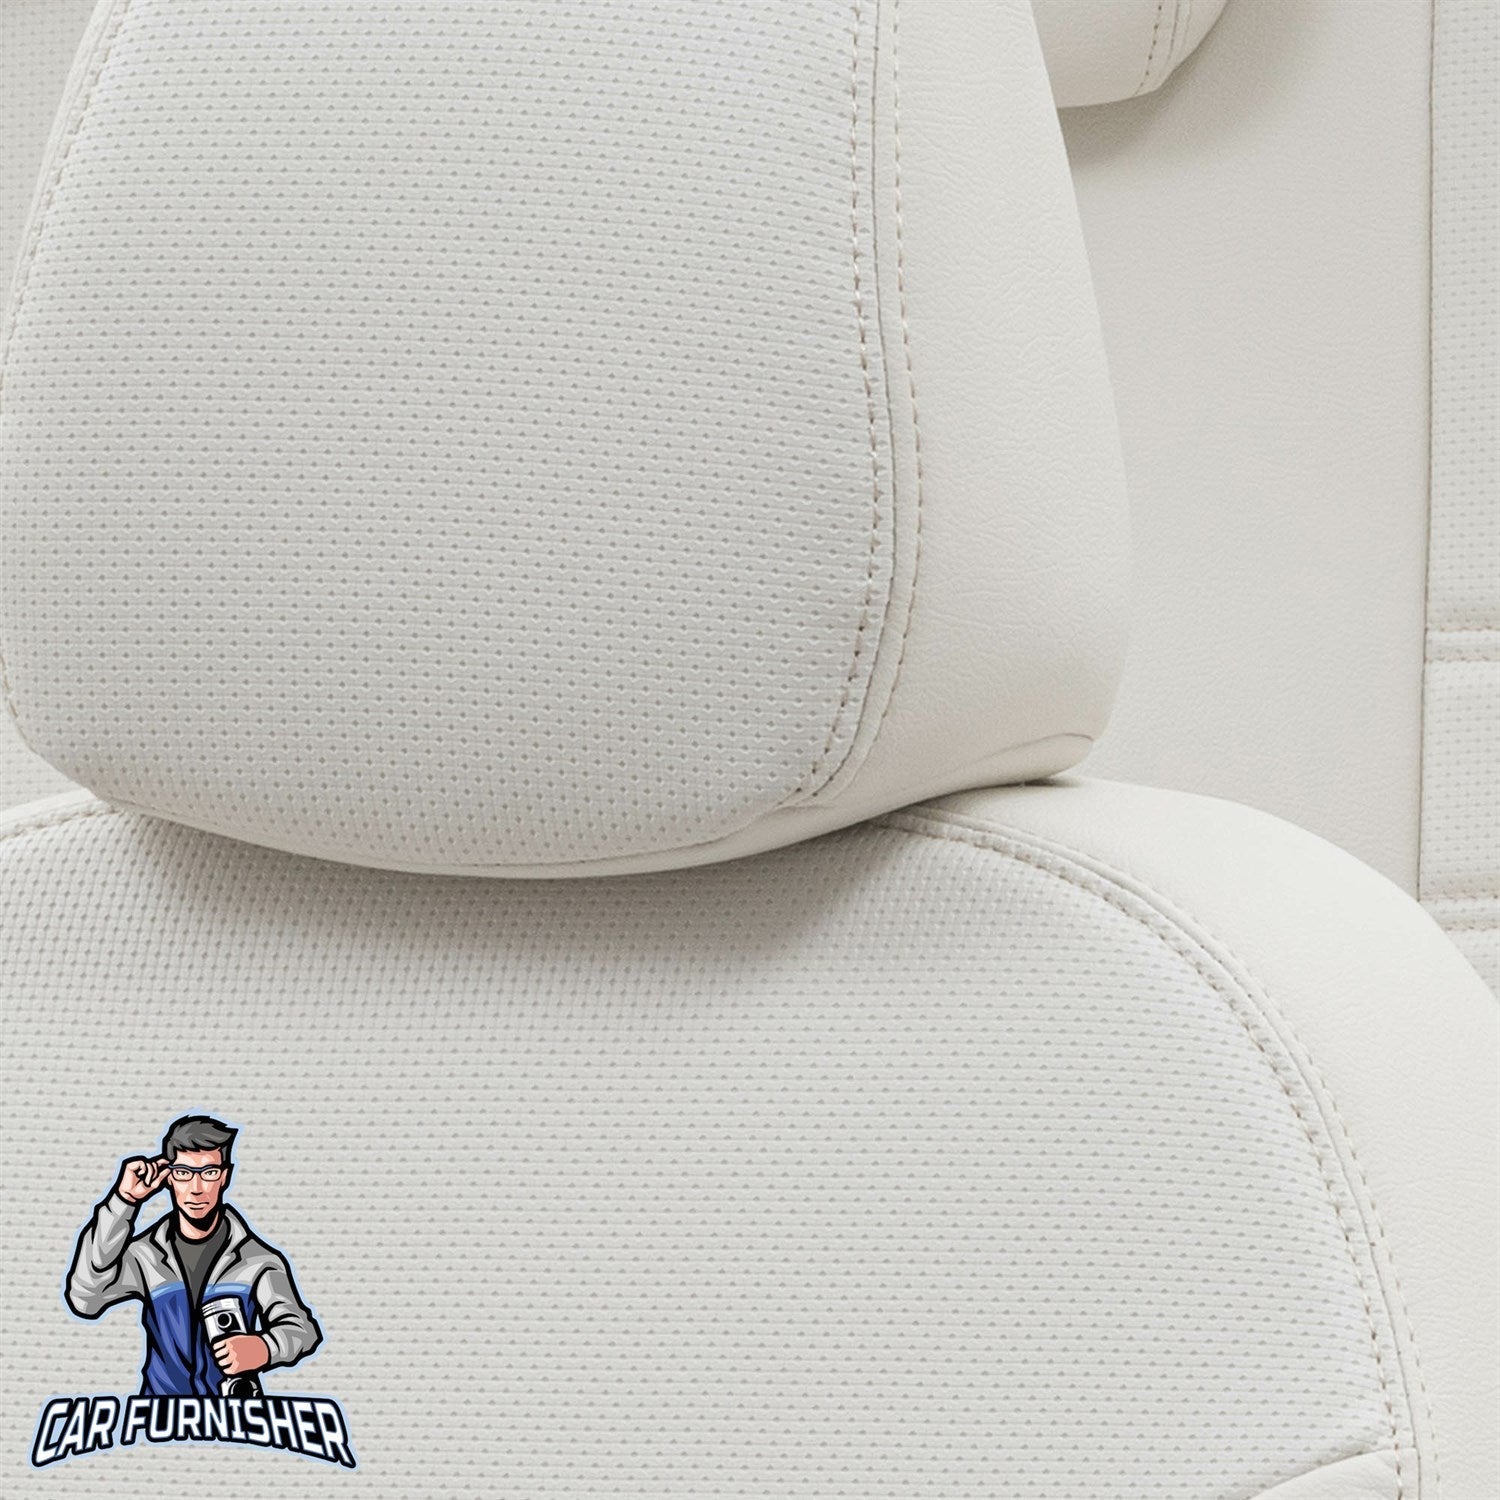 Citroen C1 Seat Covers New York Leather Design Ivory Leather